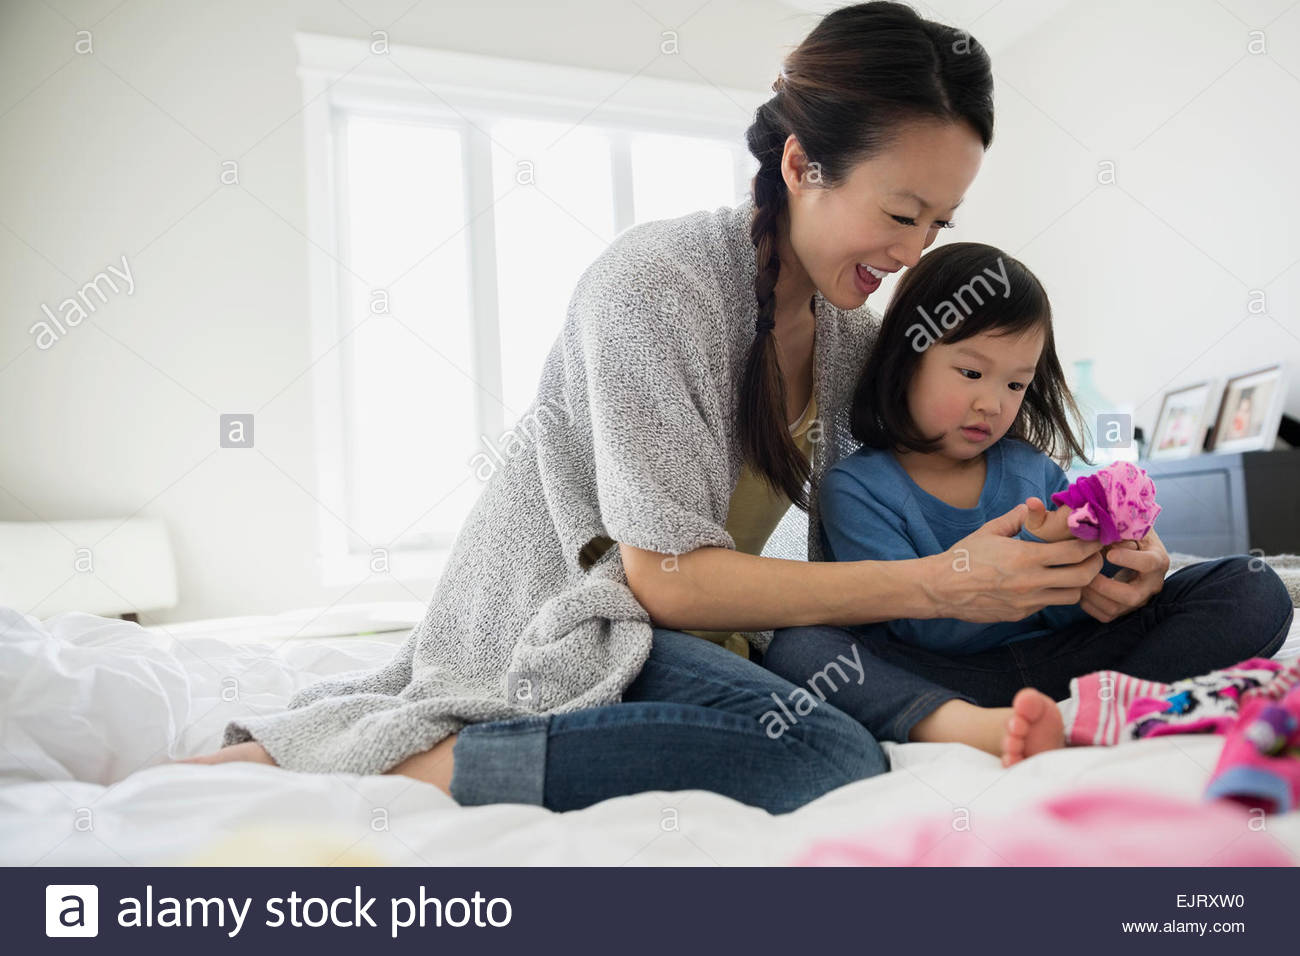 Mother and daughter sorting laundry on bed Stock Photo